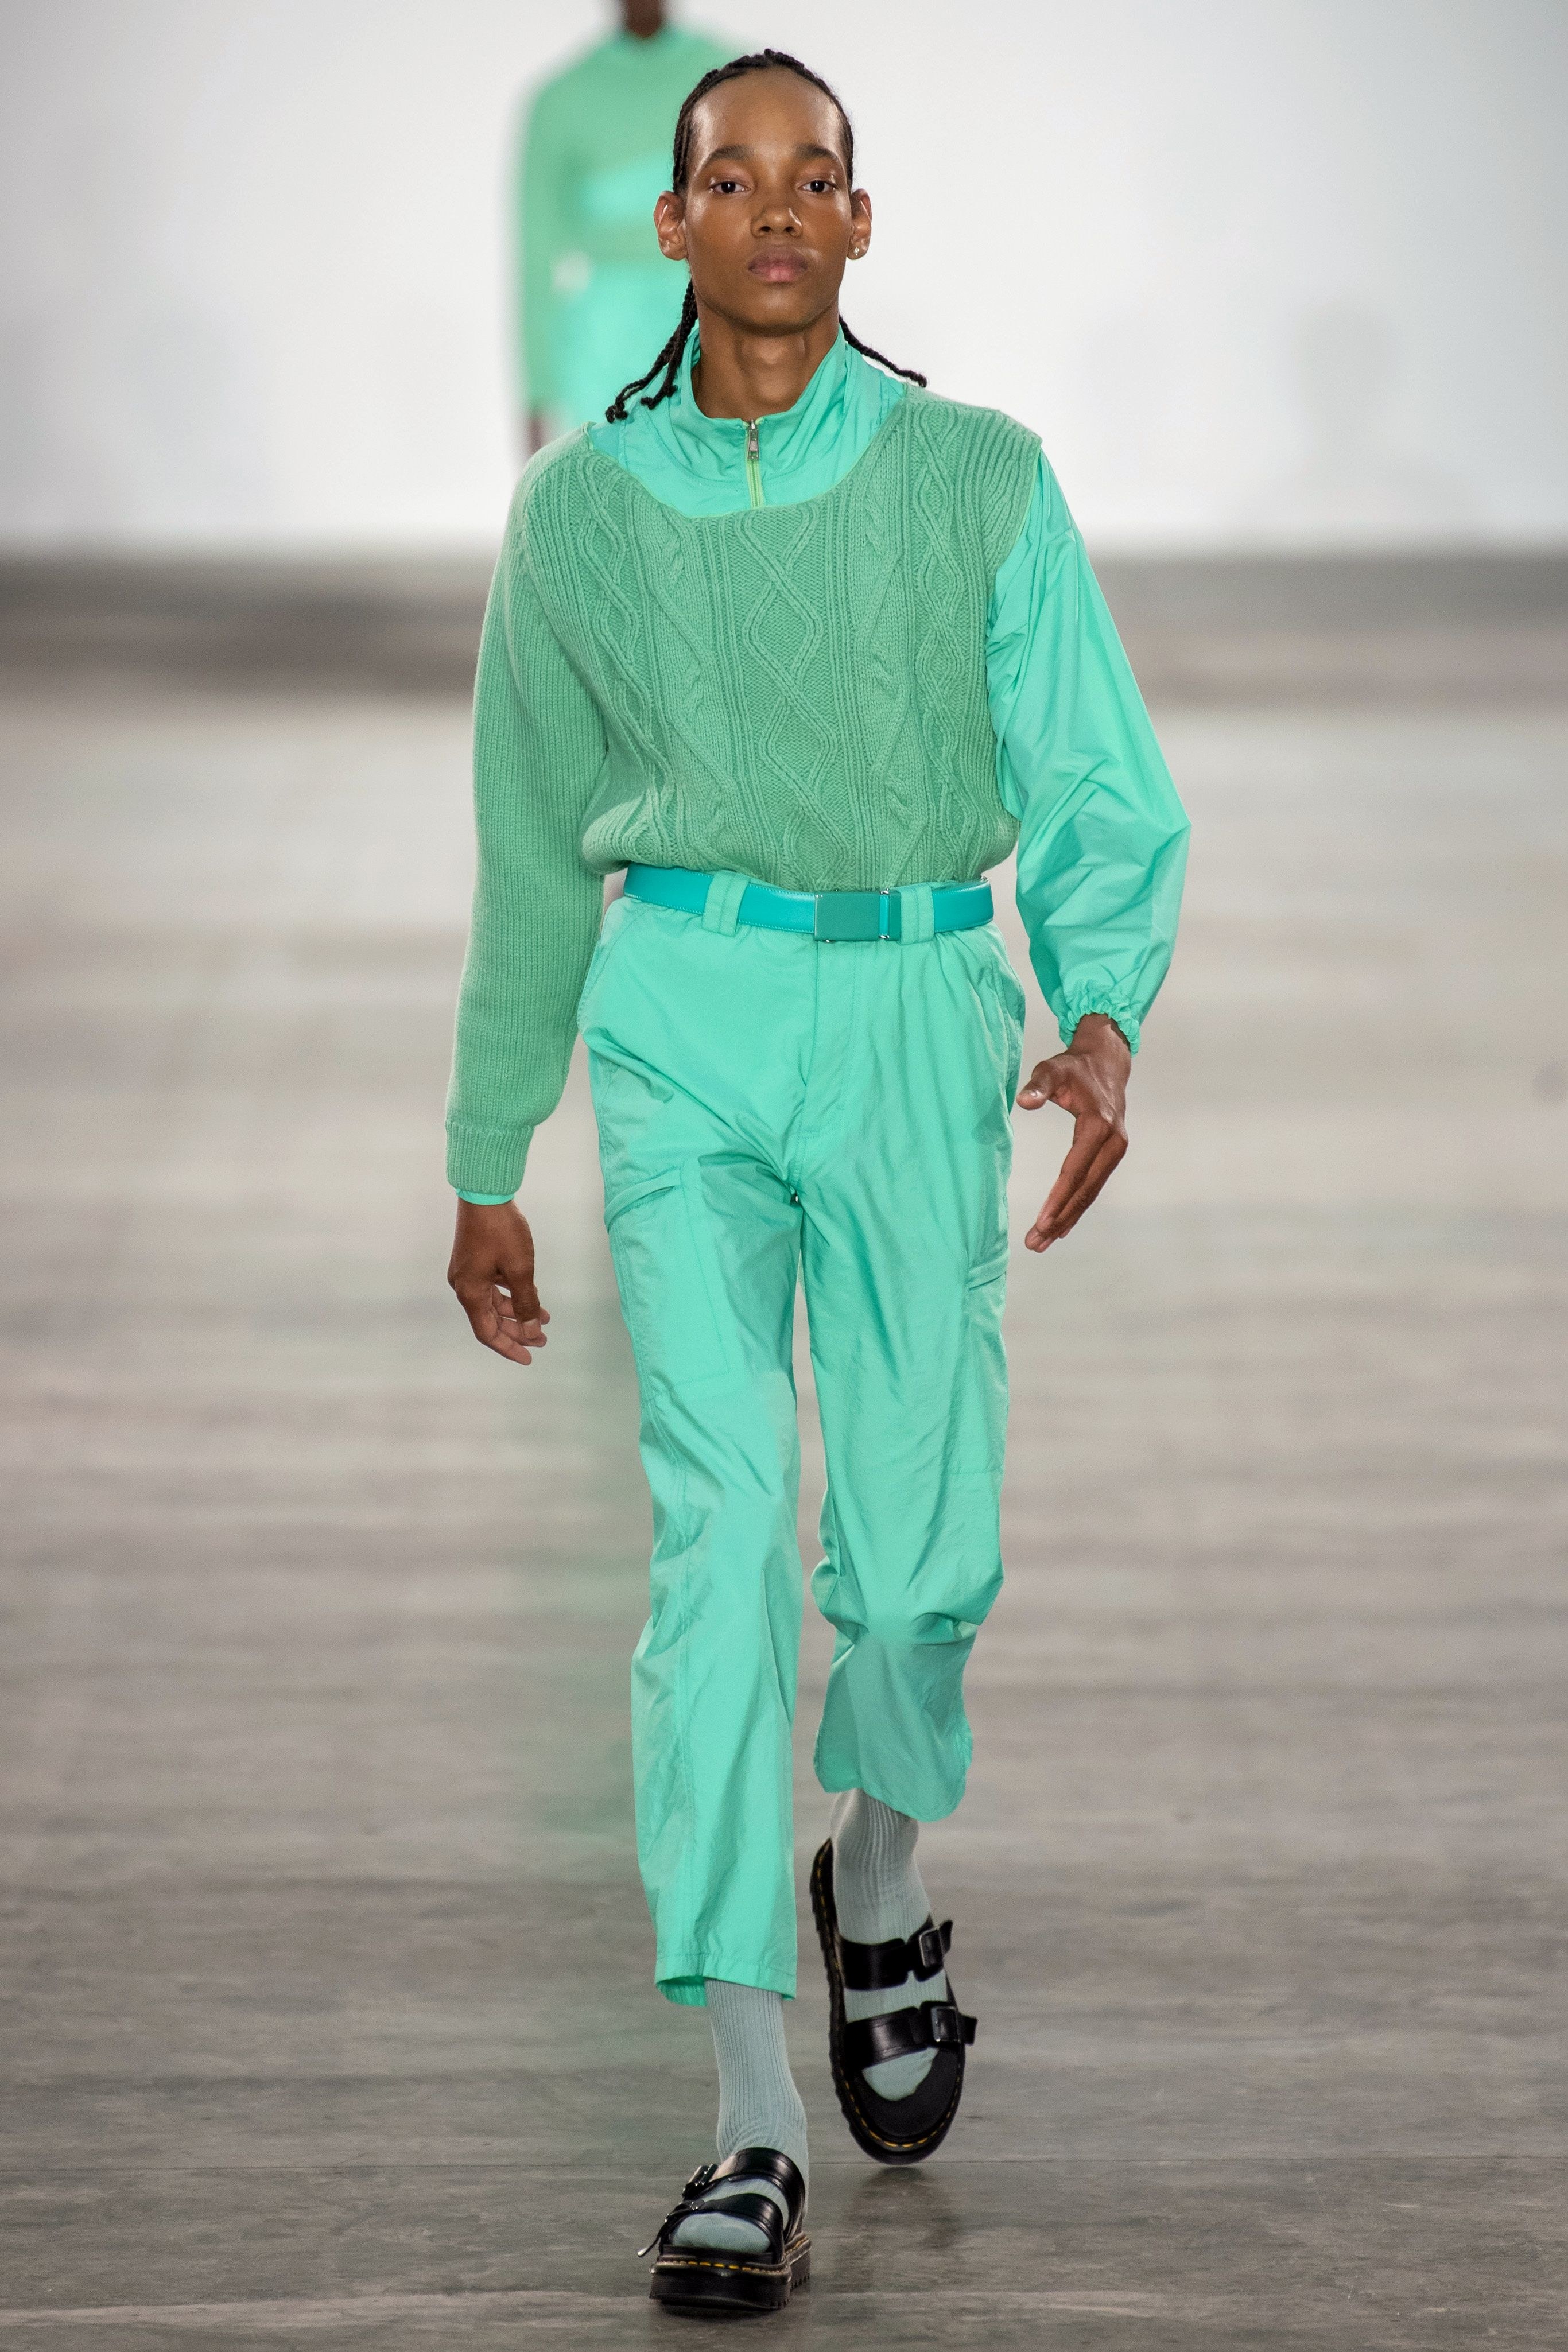 Is Men’s Fashion Finally Getting Interesting? – The Young Eclectic